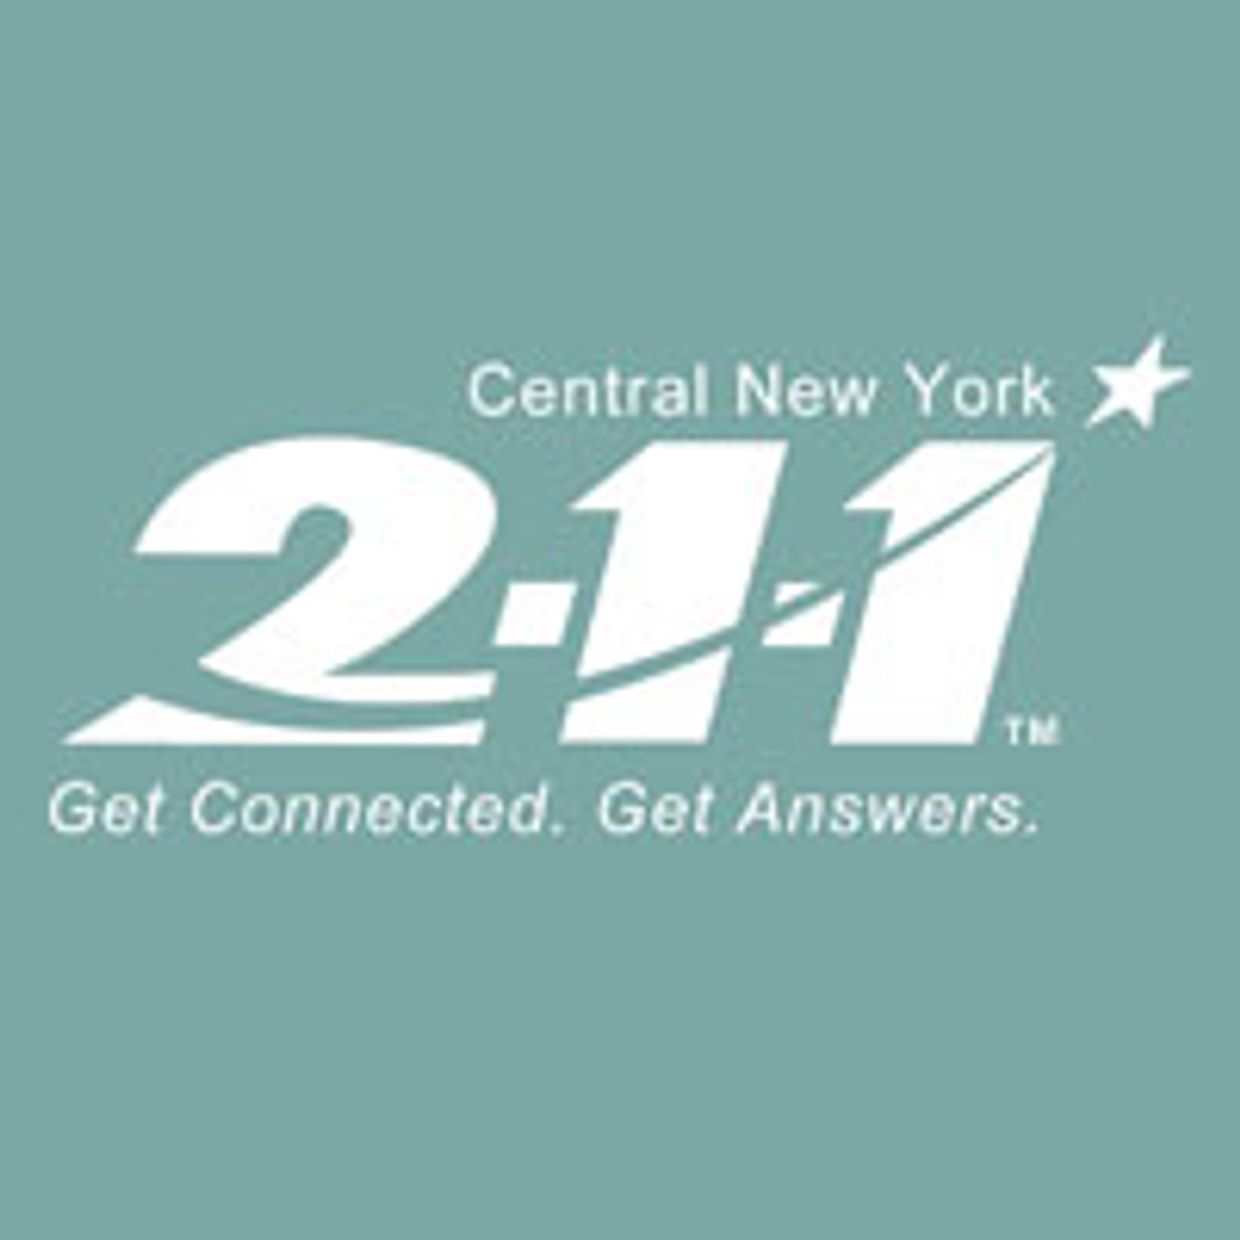 Locating basic resources such as food, shelter, employment by calling 211 in Central New York.